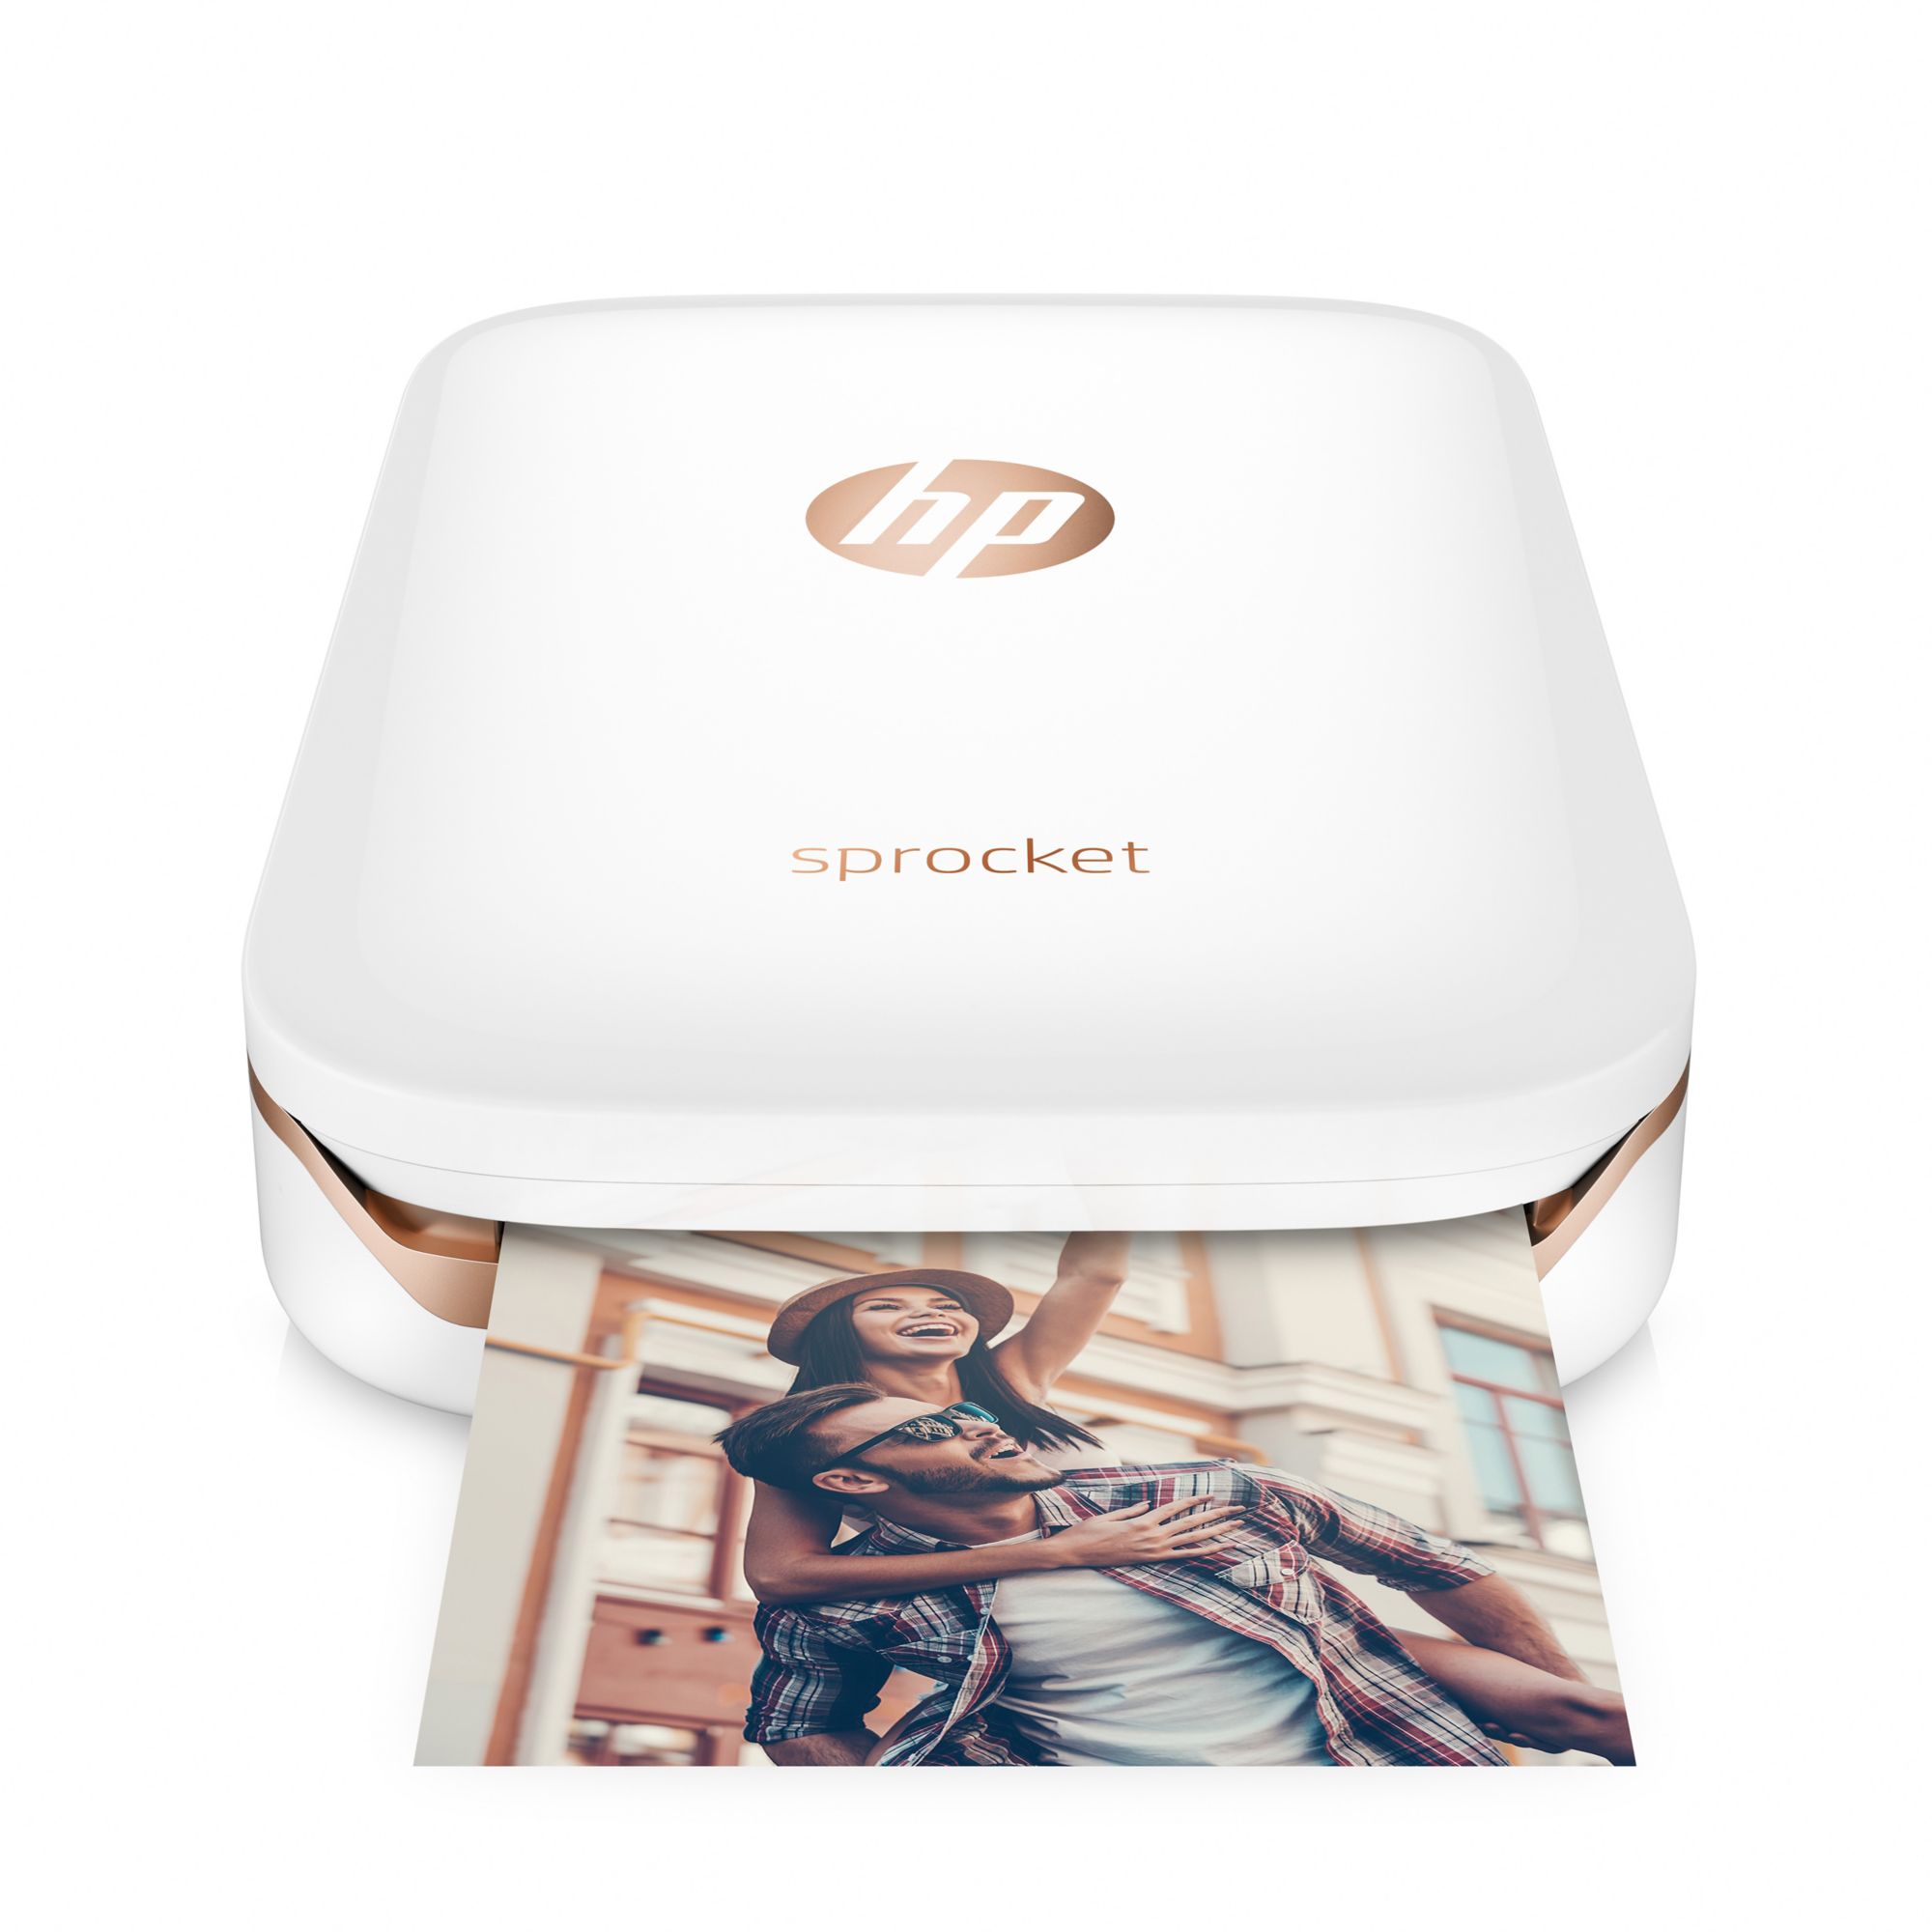 HP Sprocket portable photo printer review - The Gadgeteer